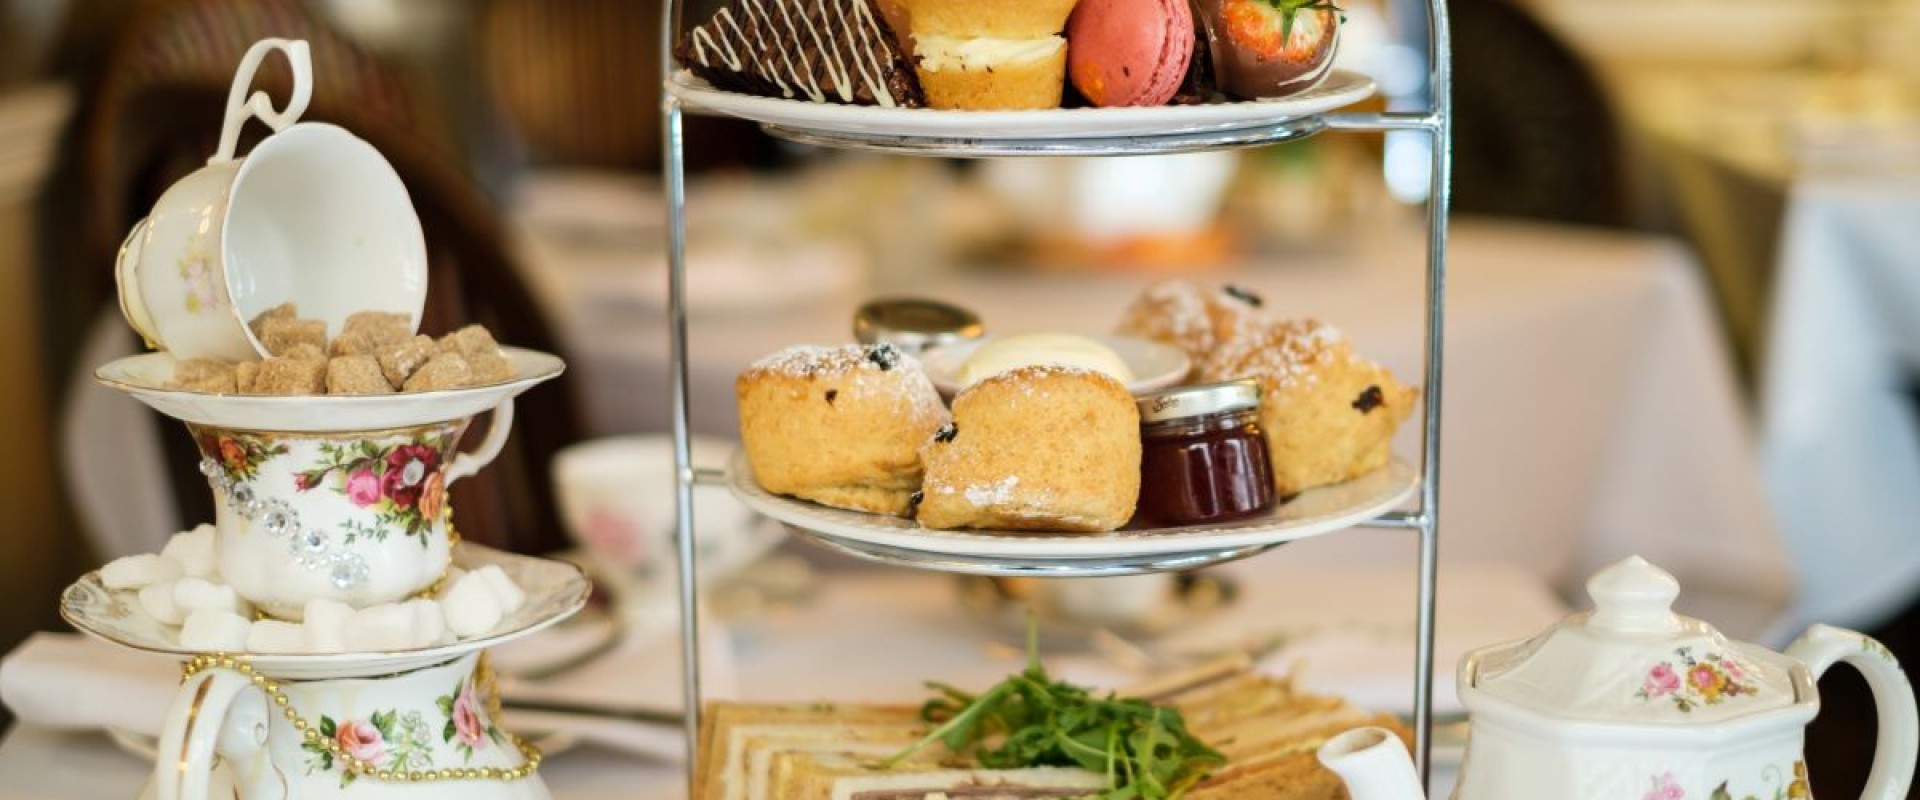 Afternoon Tea at The George Hotel in Lichfield